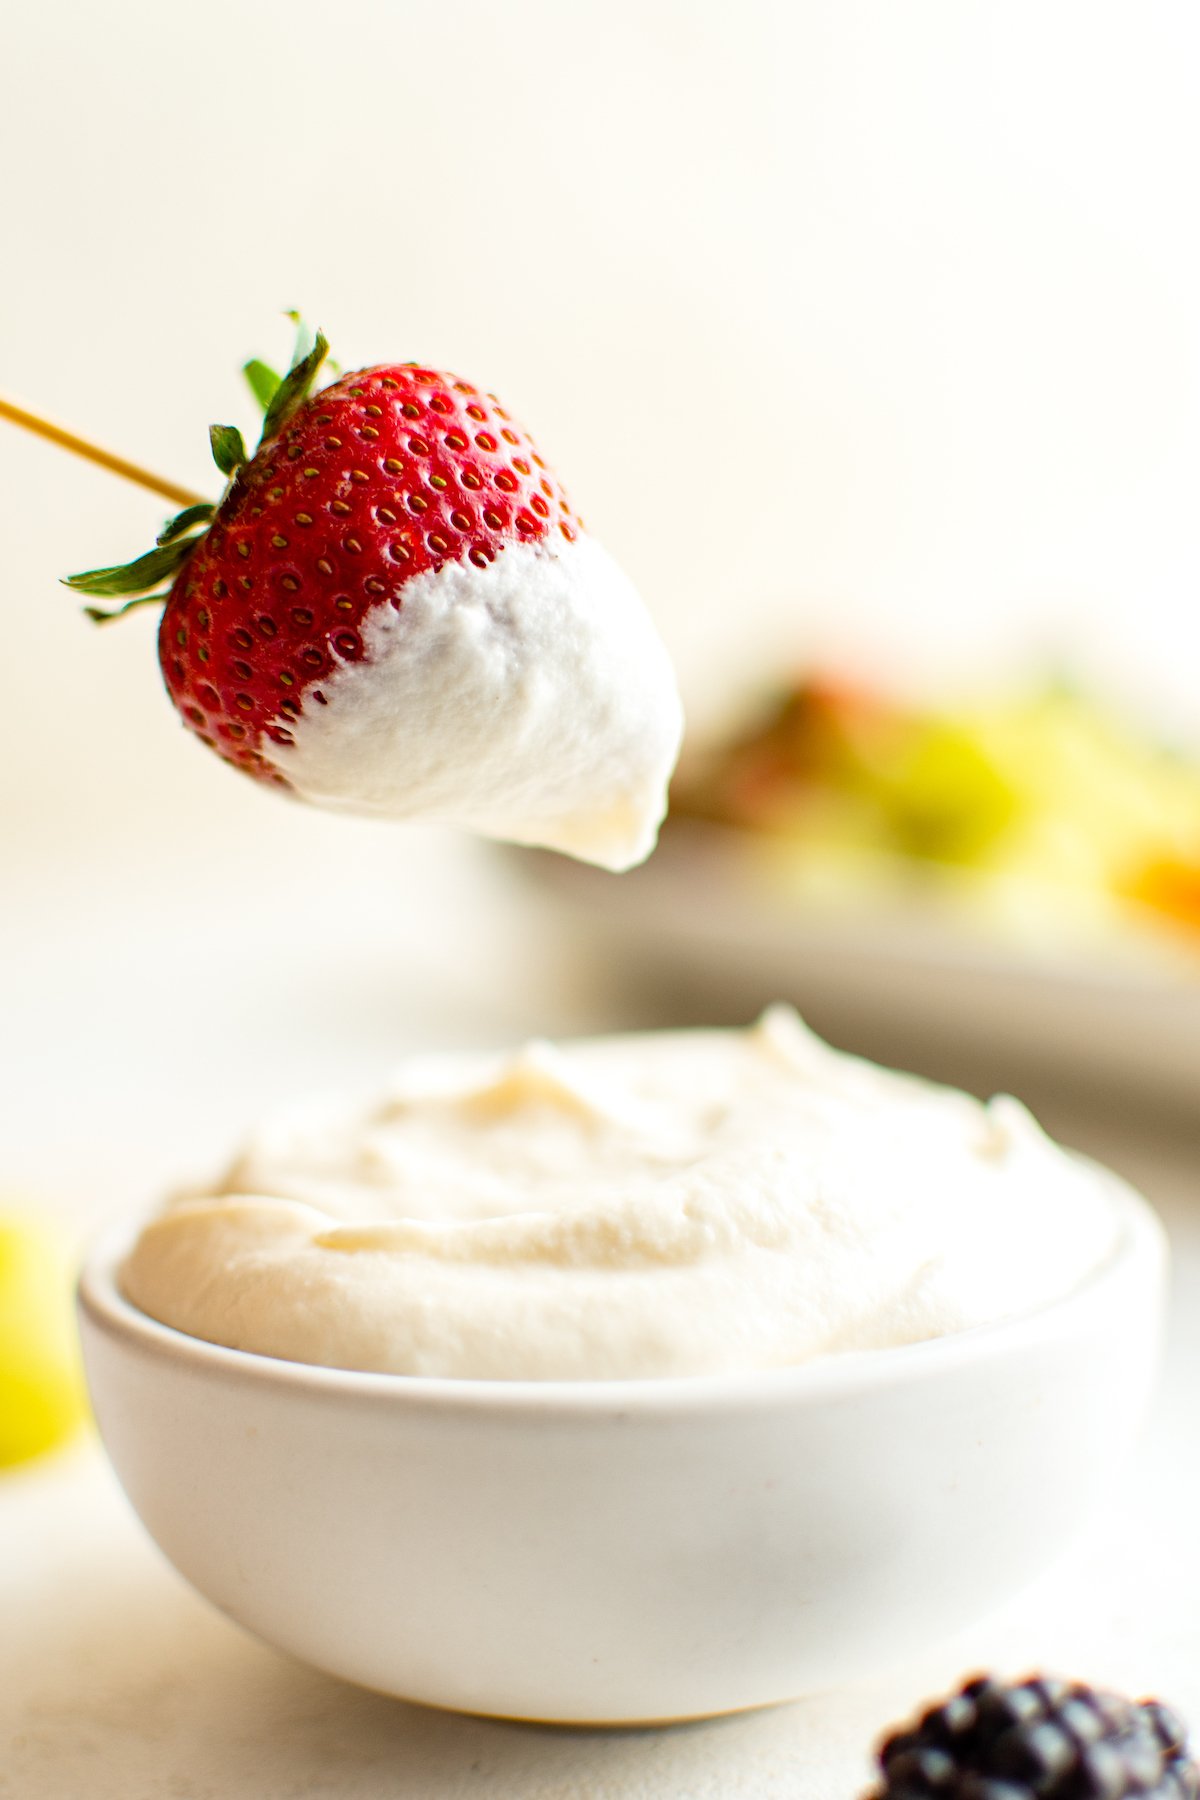 Dipping a strawberry in creamy sauce.